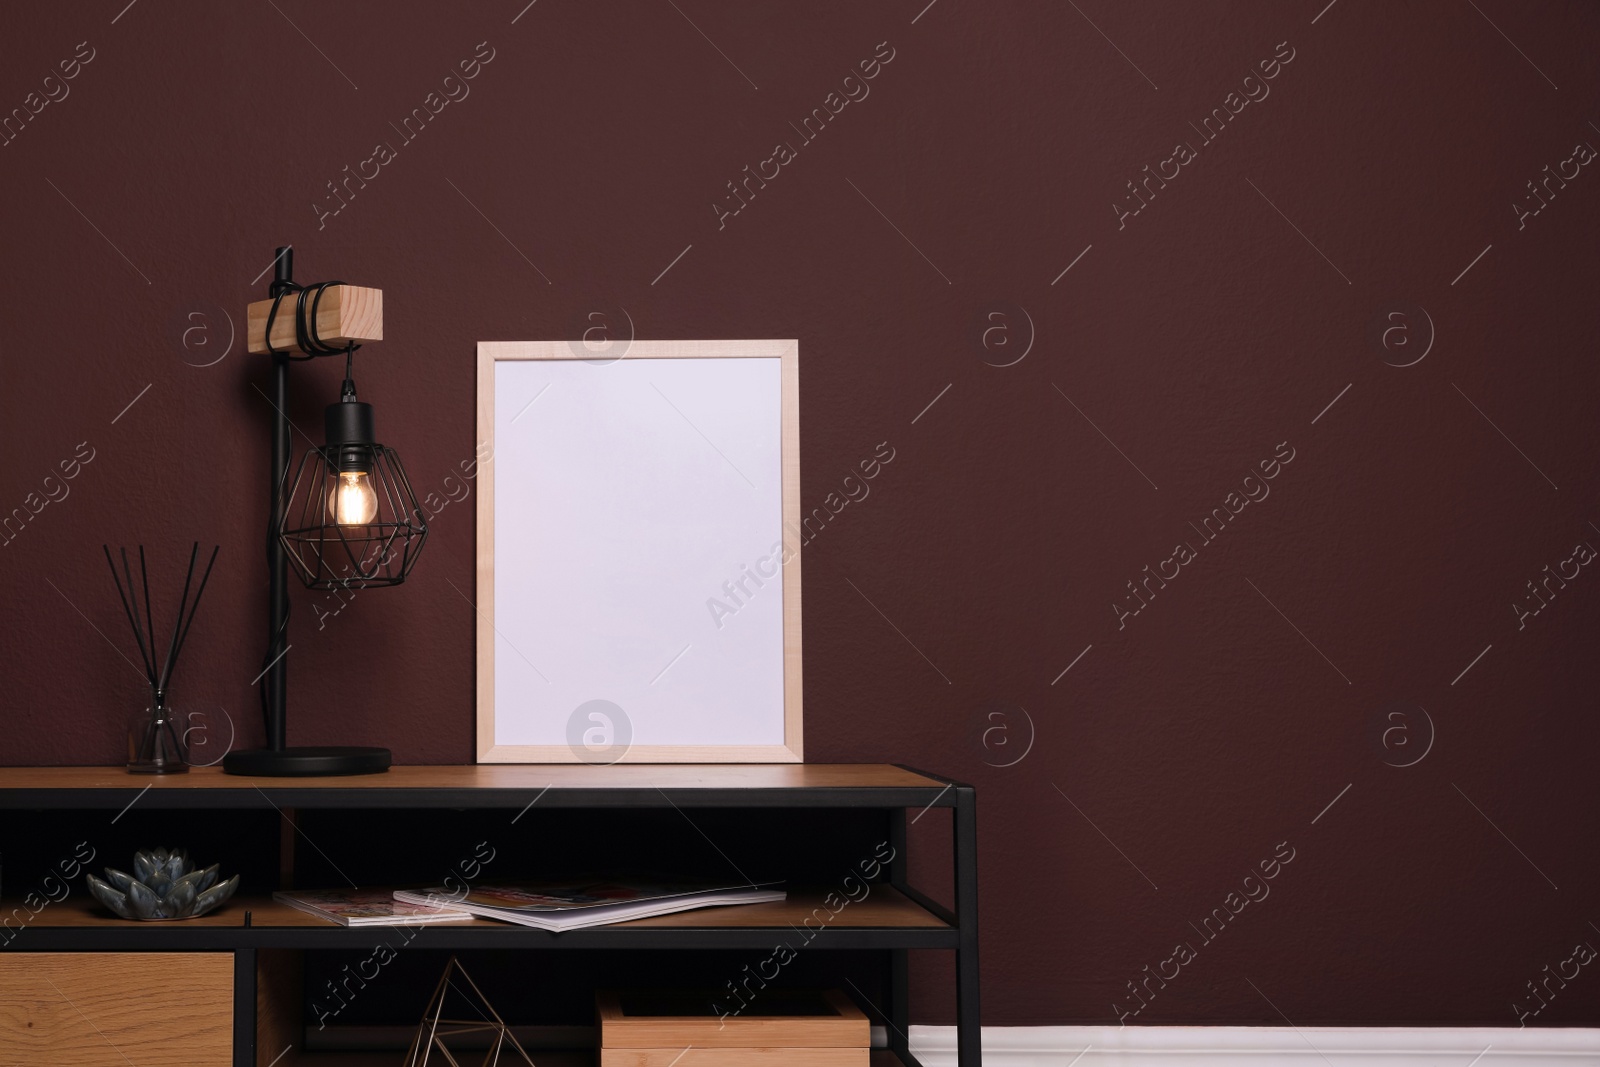 Photo of Empty frame and stylish lamp on wooden table near brown wall. Mockup for design